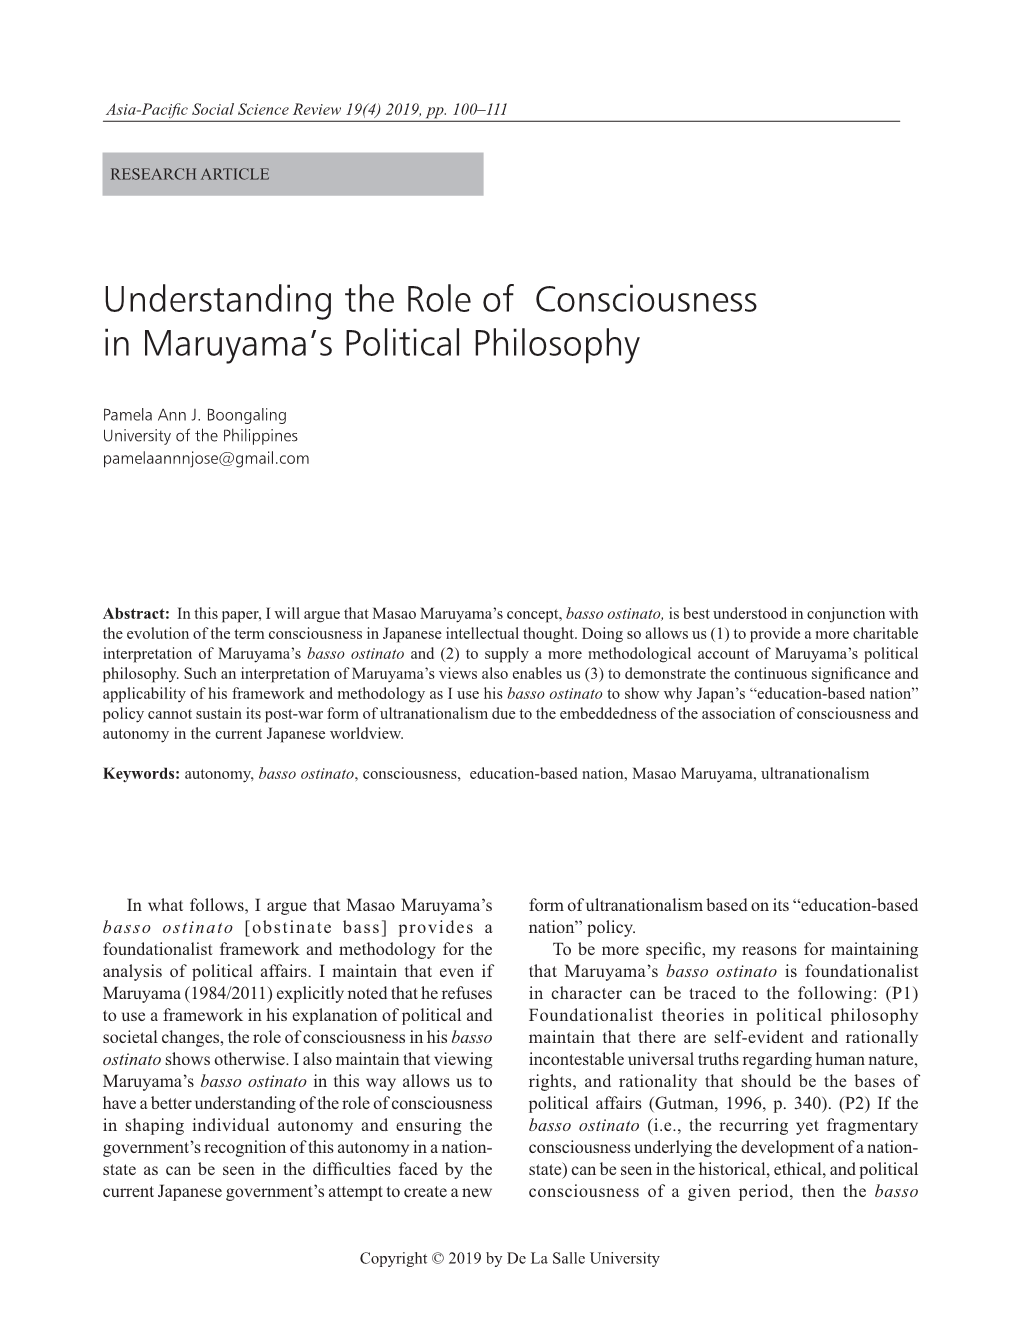 Understanding the Role of Consciousness in Maruyama's